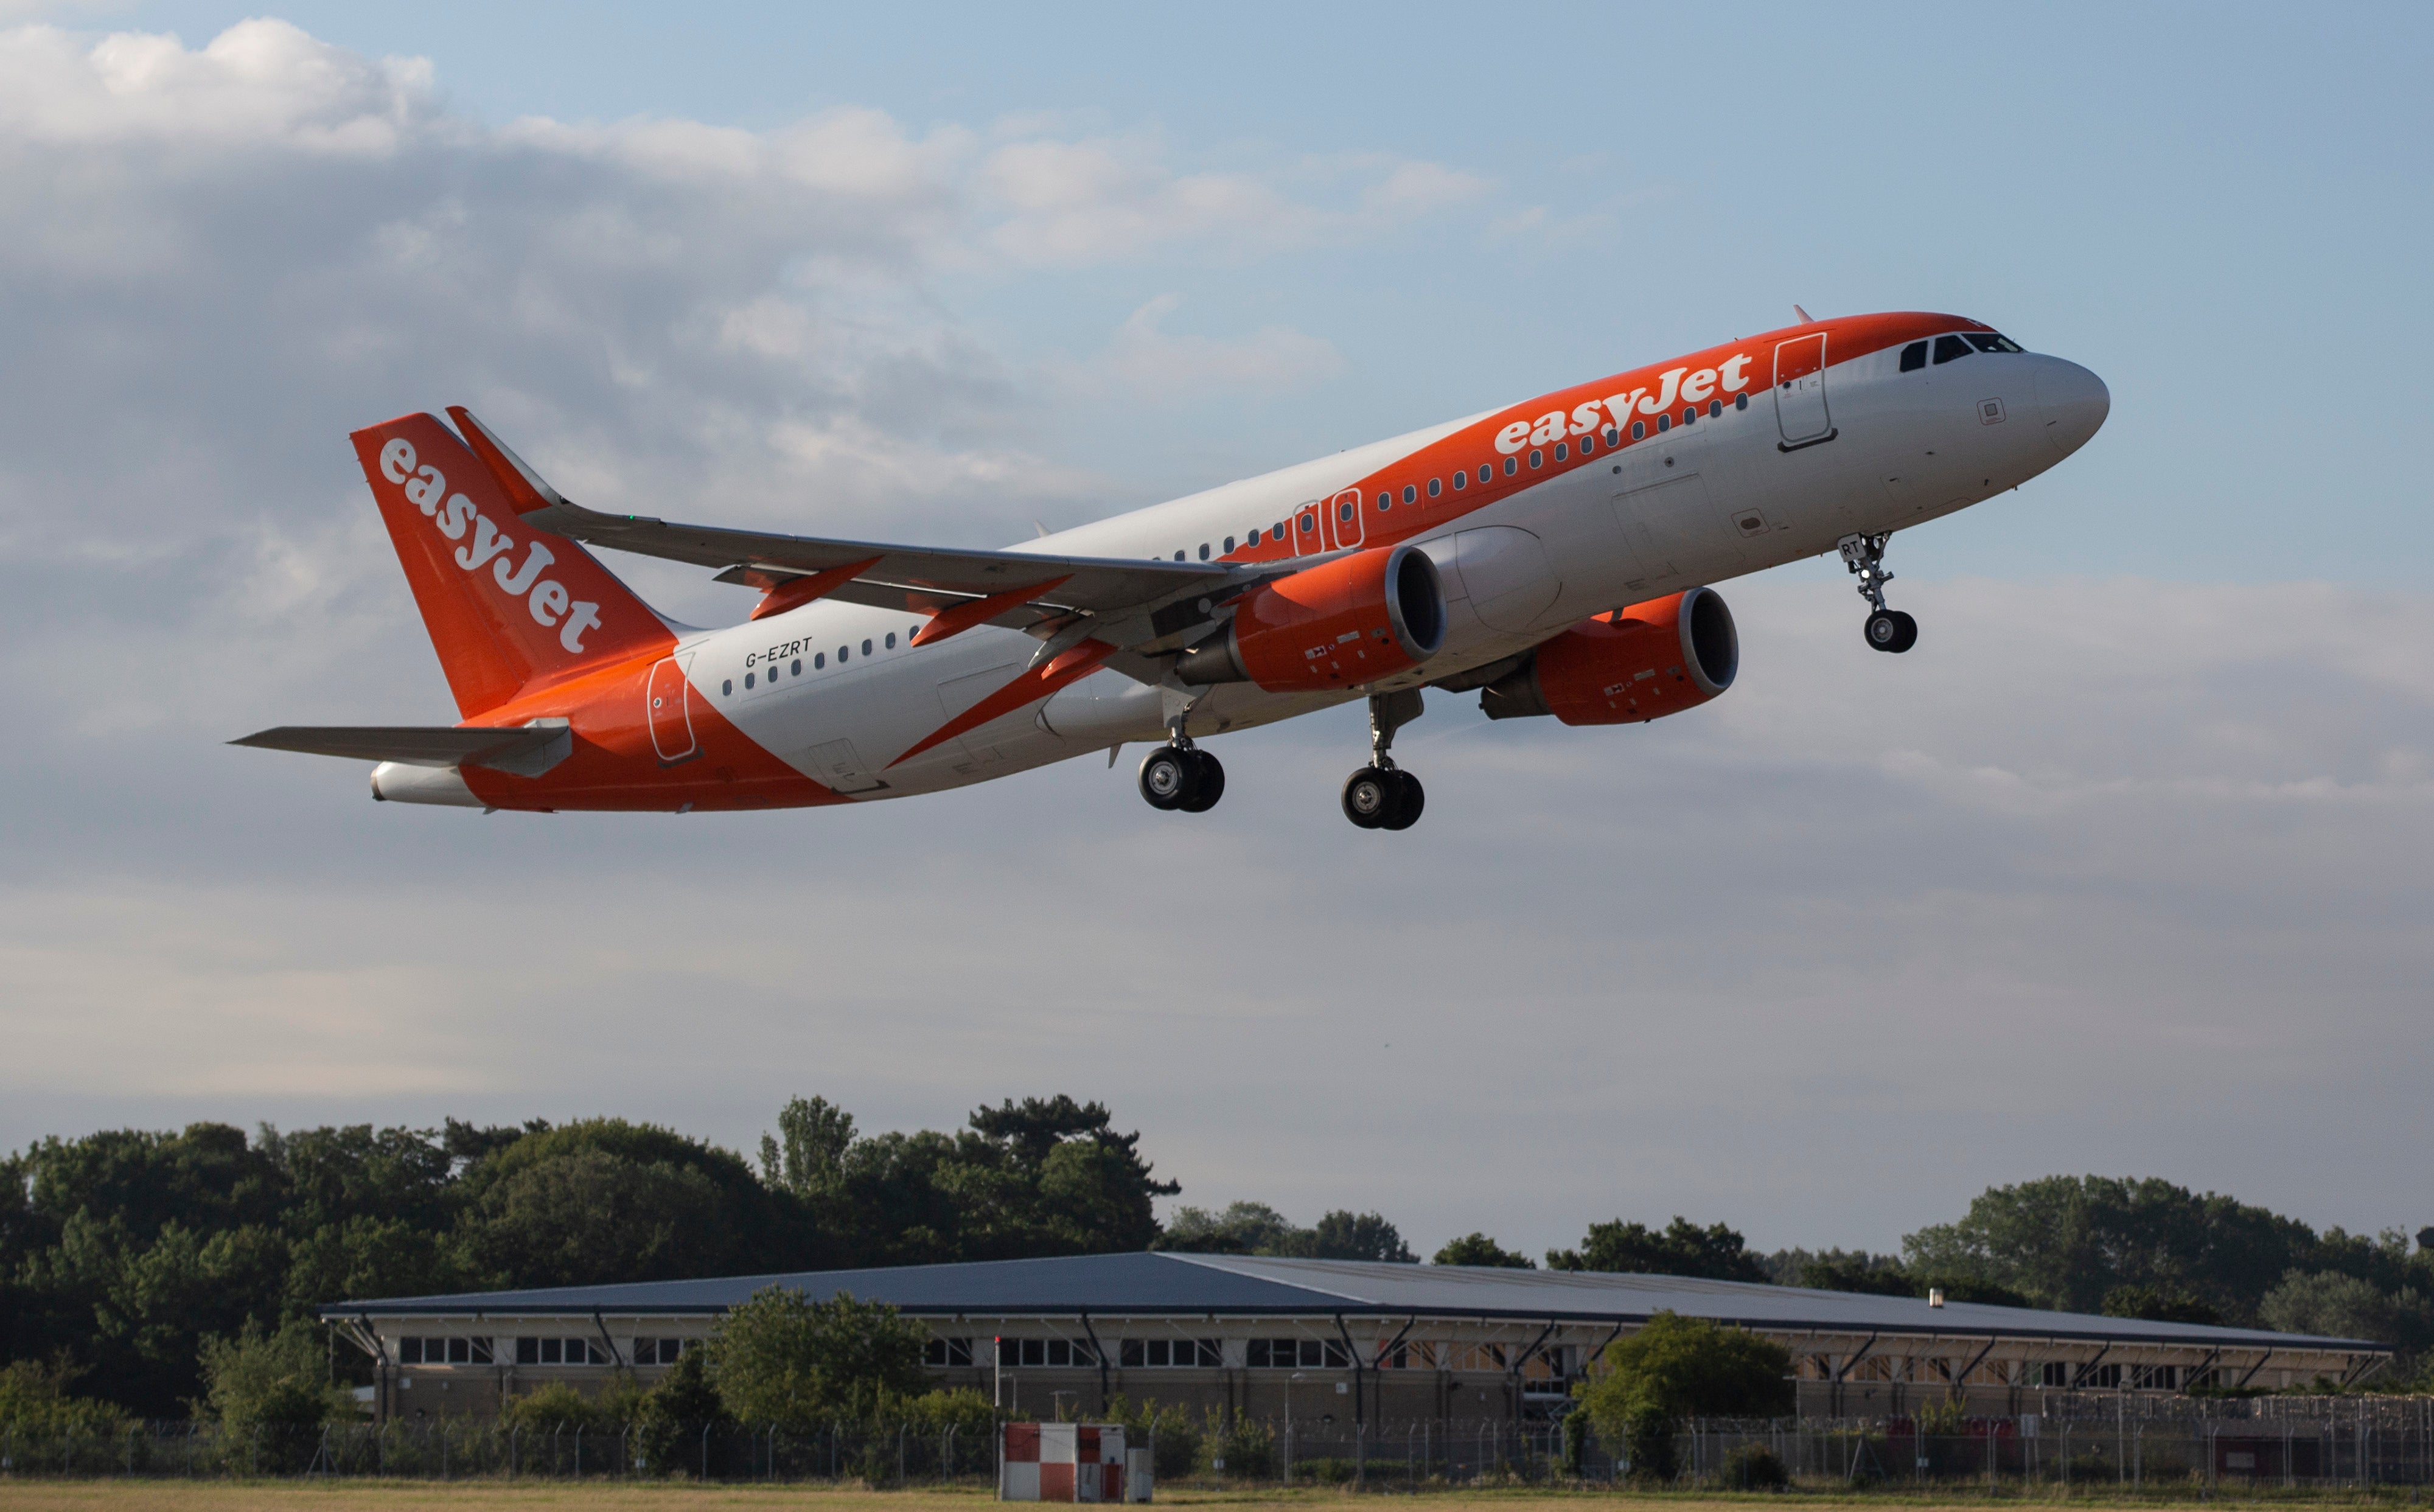 easyJet has seen a jump in bookings for winter 2021/22